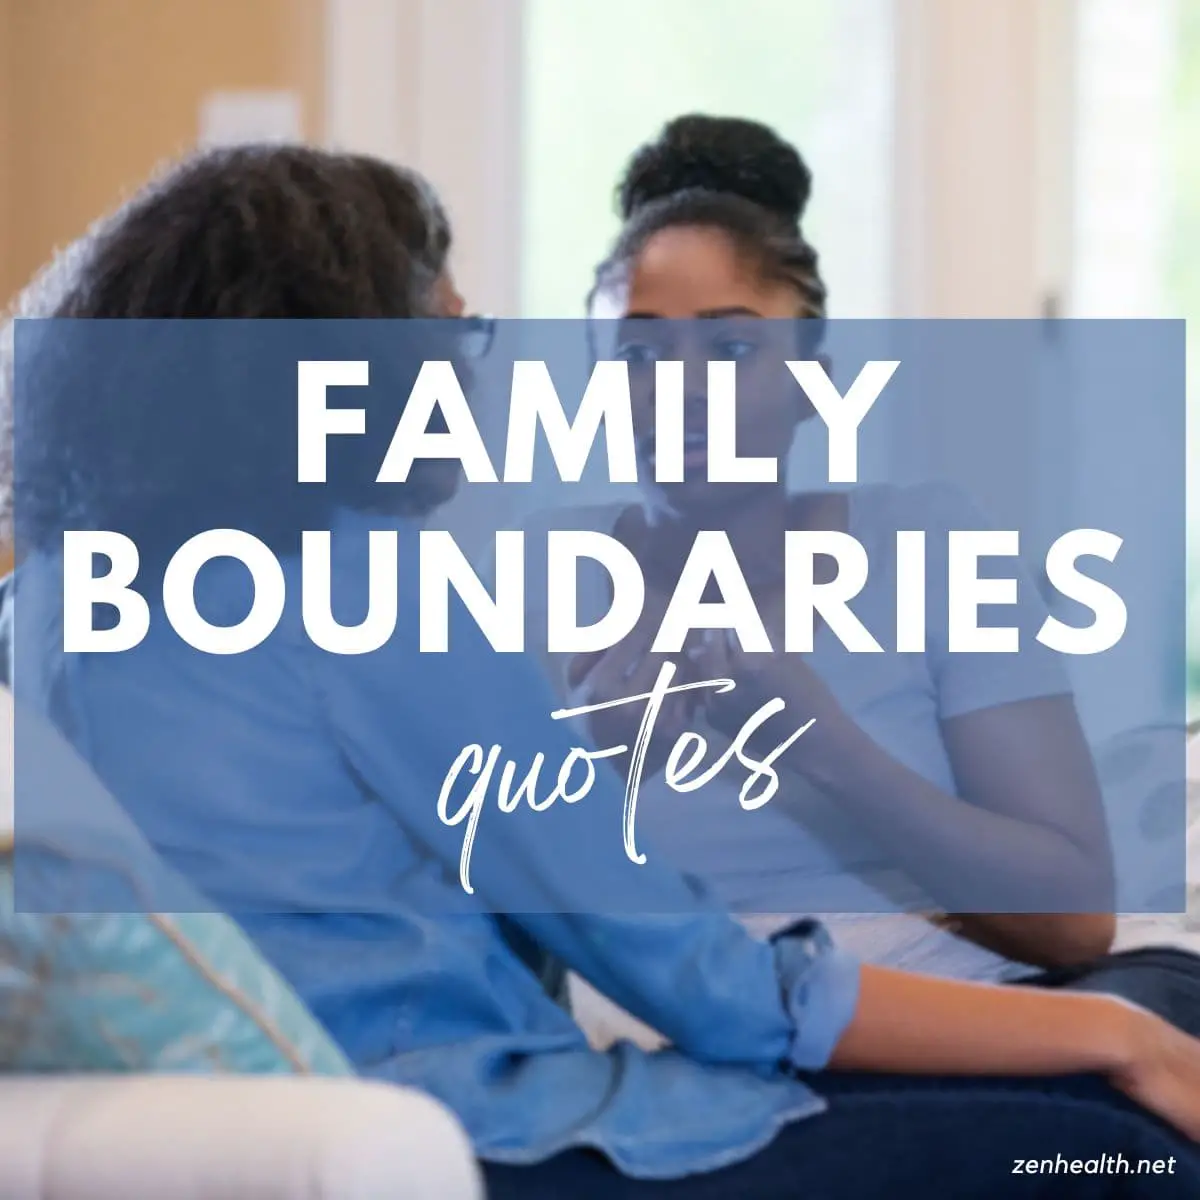 family boundaries quotes text overlay on a photo of a young girl speaking to an older woman while sitting on a sofa